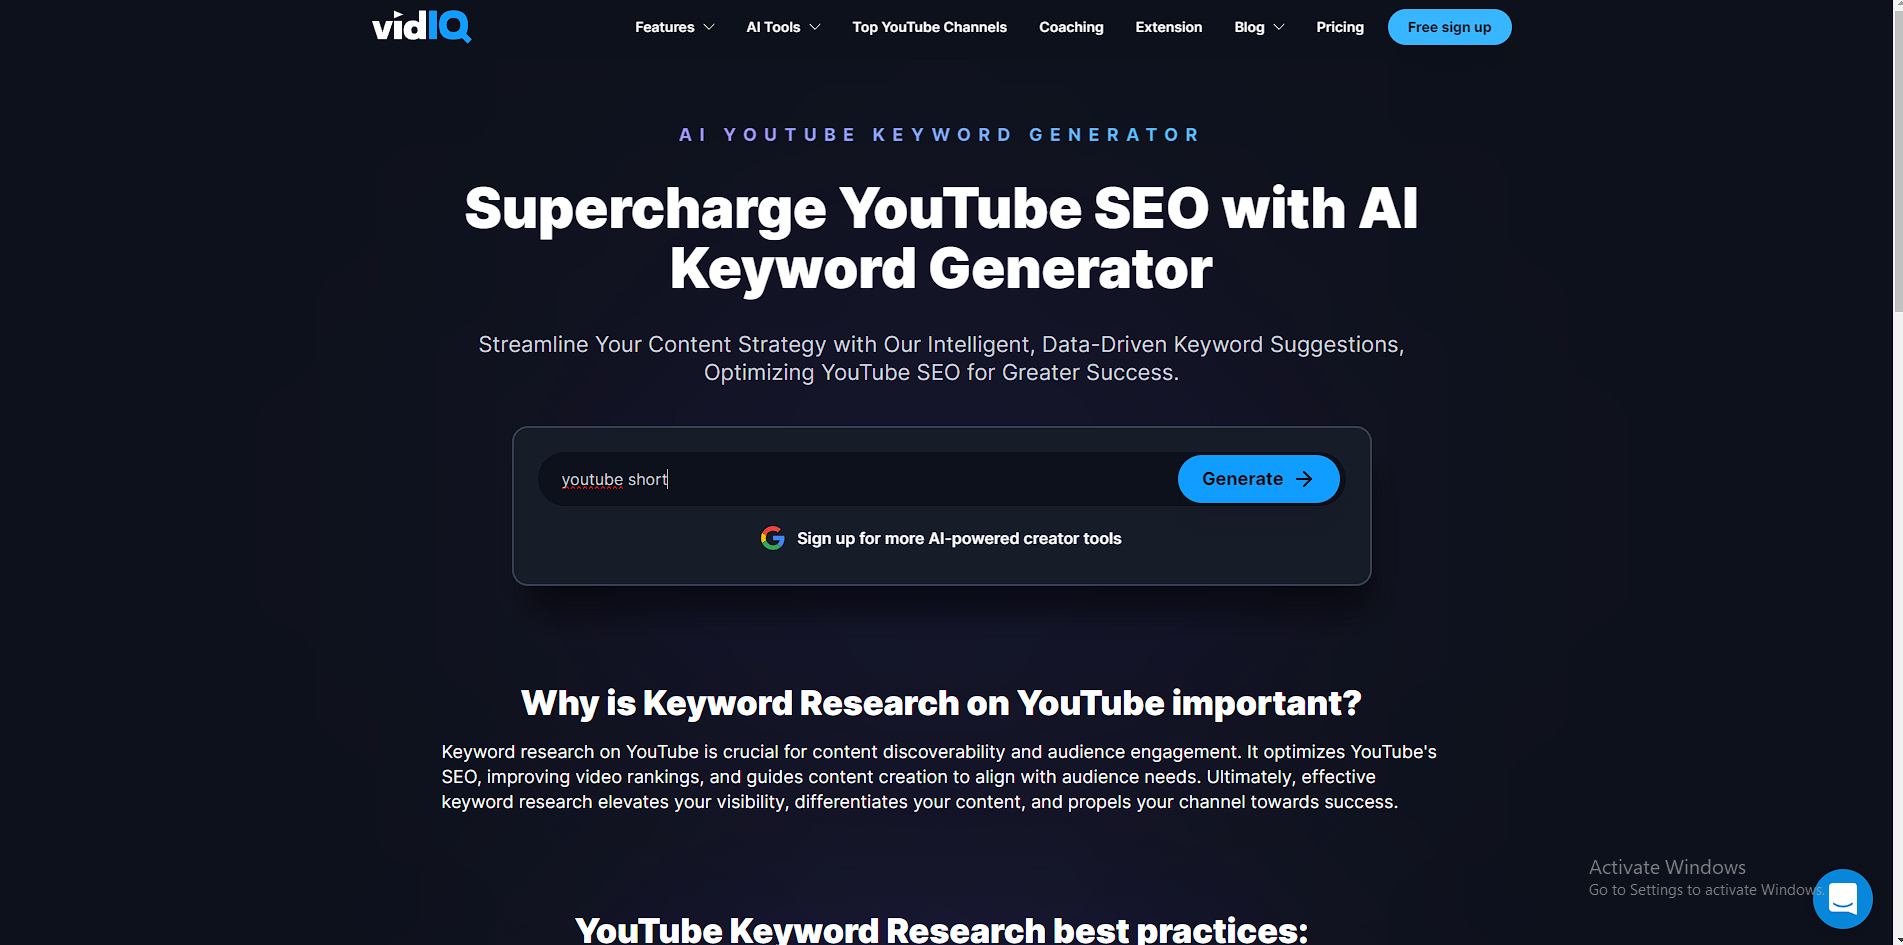 How to Find YouTube Keywords that Grow Your Channel